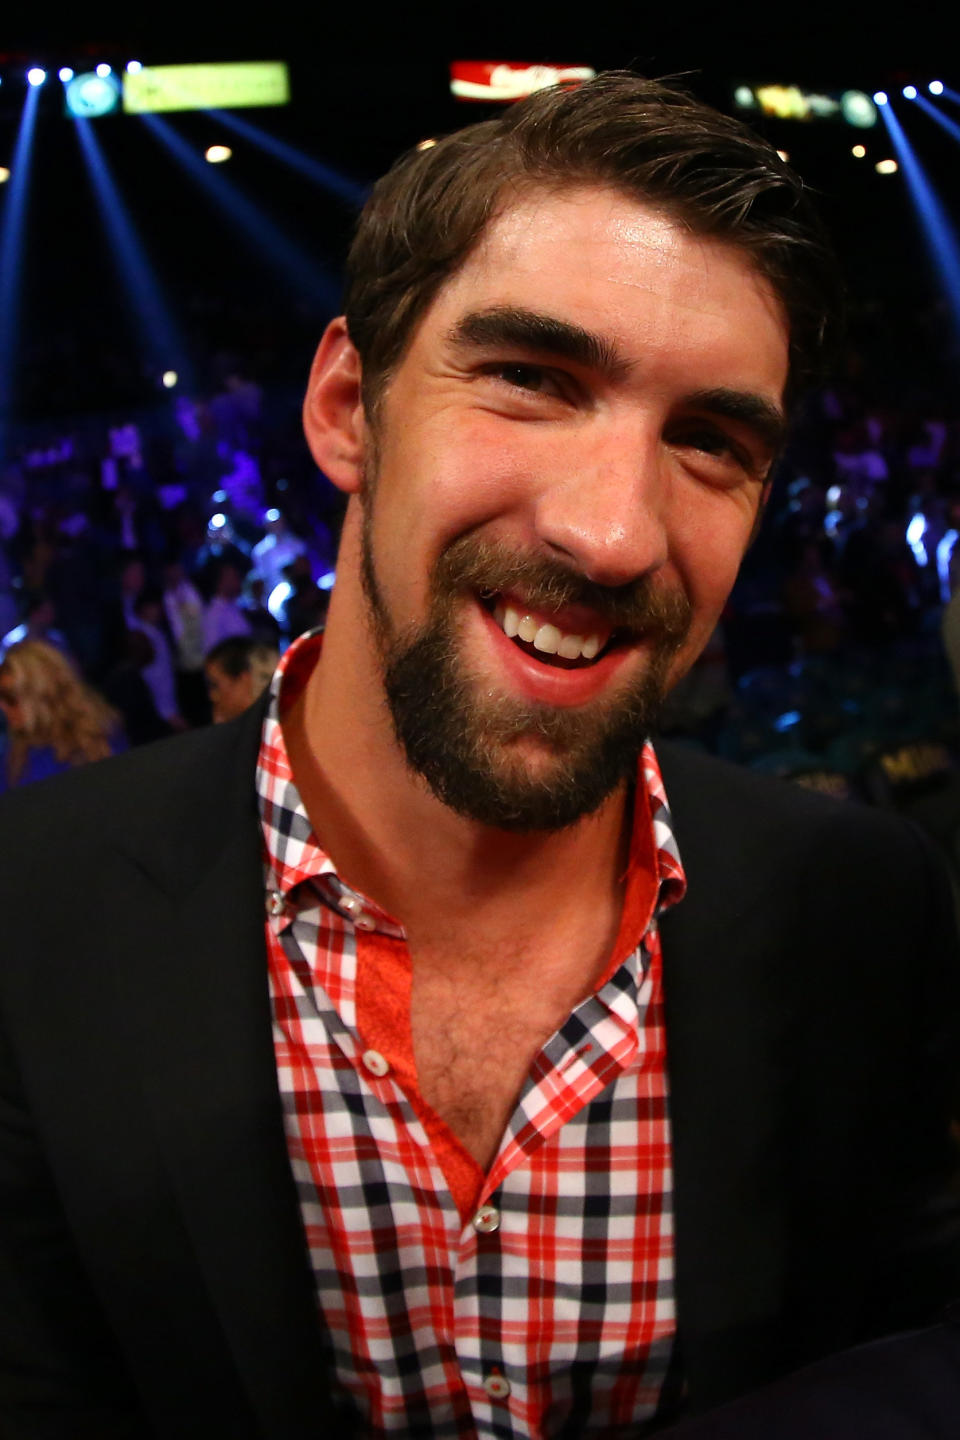 <a href="http://www.huffingtonpost.com/nick-graham/michael-phelps-bong-pictu_b_162842.html" target="_blank">“[Phelps] firmly denies that he takes drugs, suggesting that the notorious photo of him smoking from a bong was a one-time lapse of judgment.”</a>